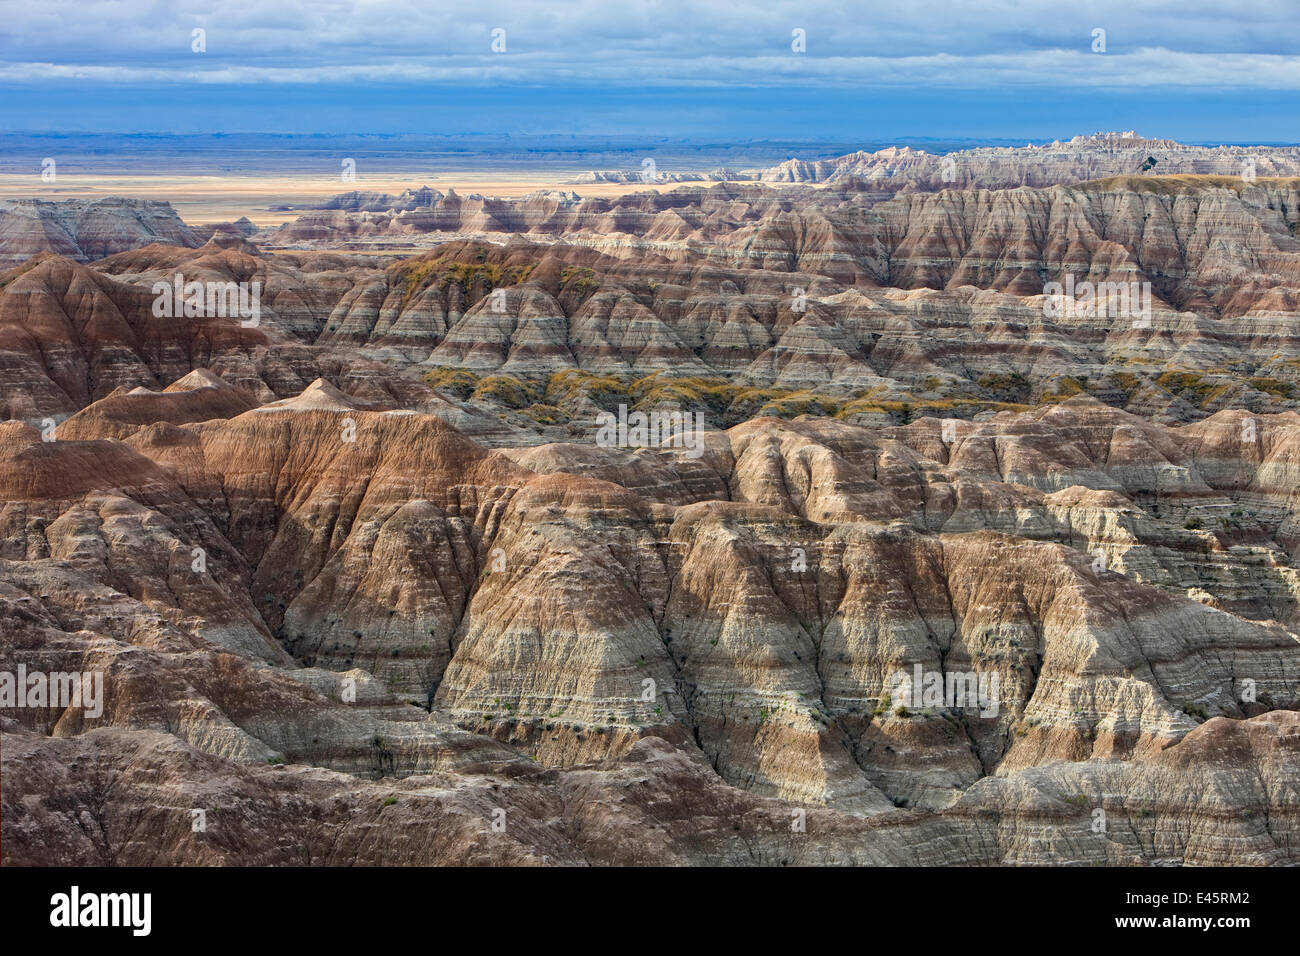 View of Badlands National Park, with shadows cast between mountain peaks, and sediment layers visible, South Dakota, USA. September 2009. Stock Photo